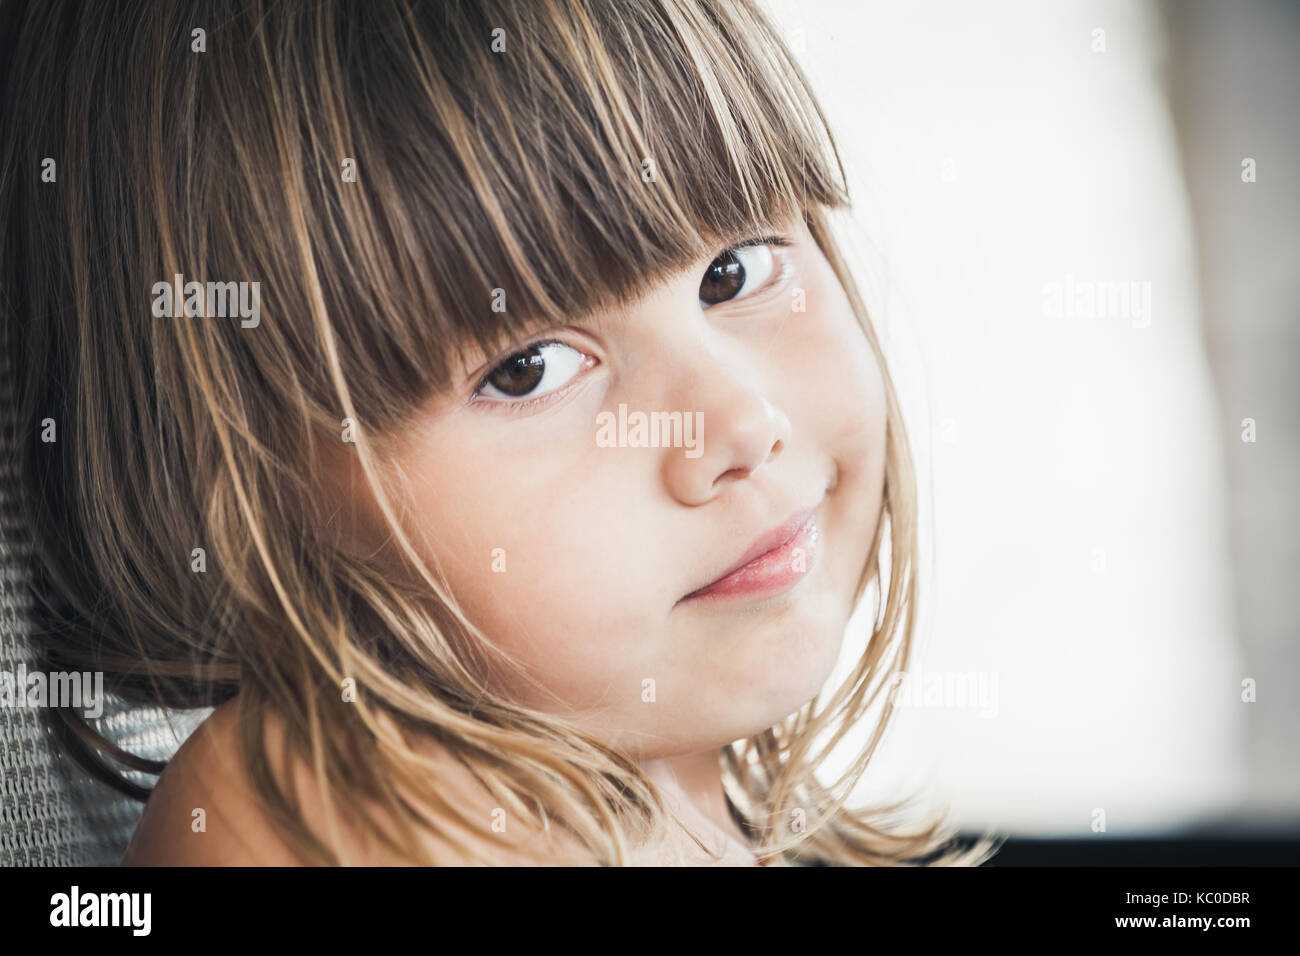 Serious Blond little girl, close-up outdoor face portrait Stock Photo